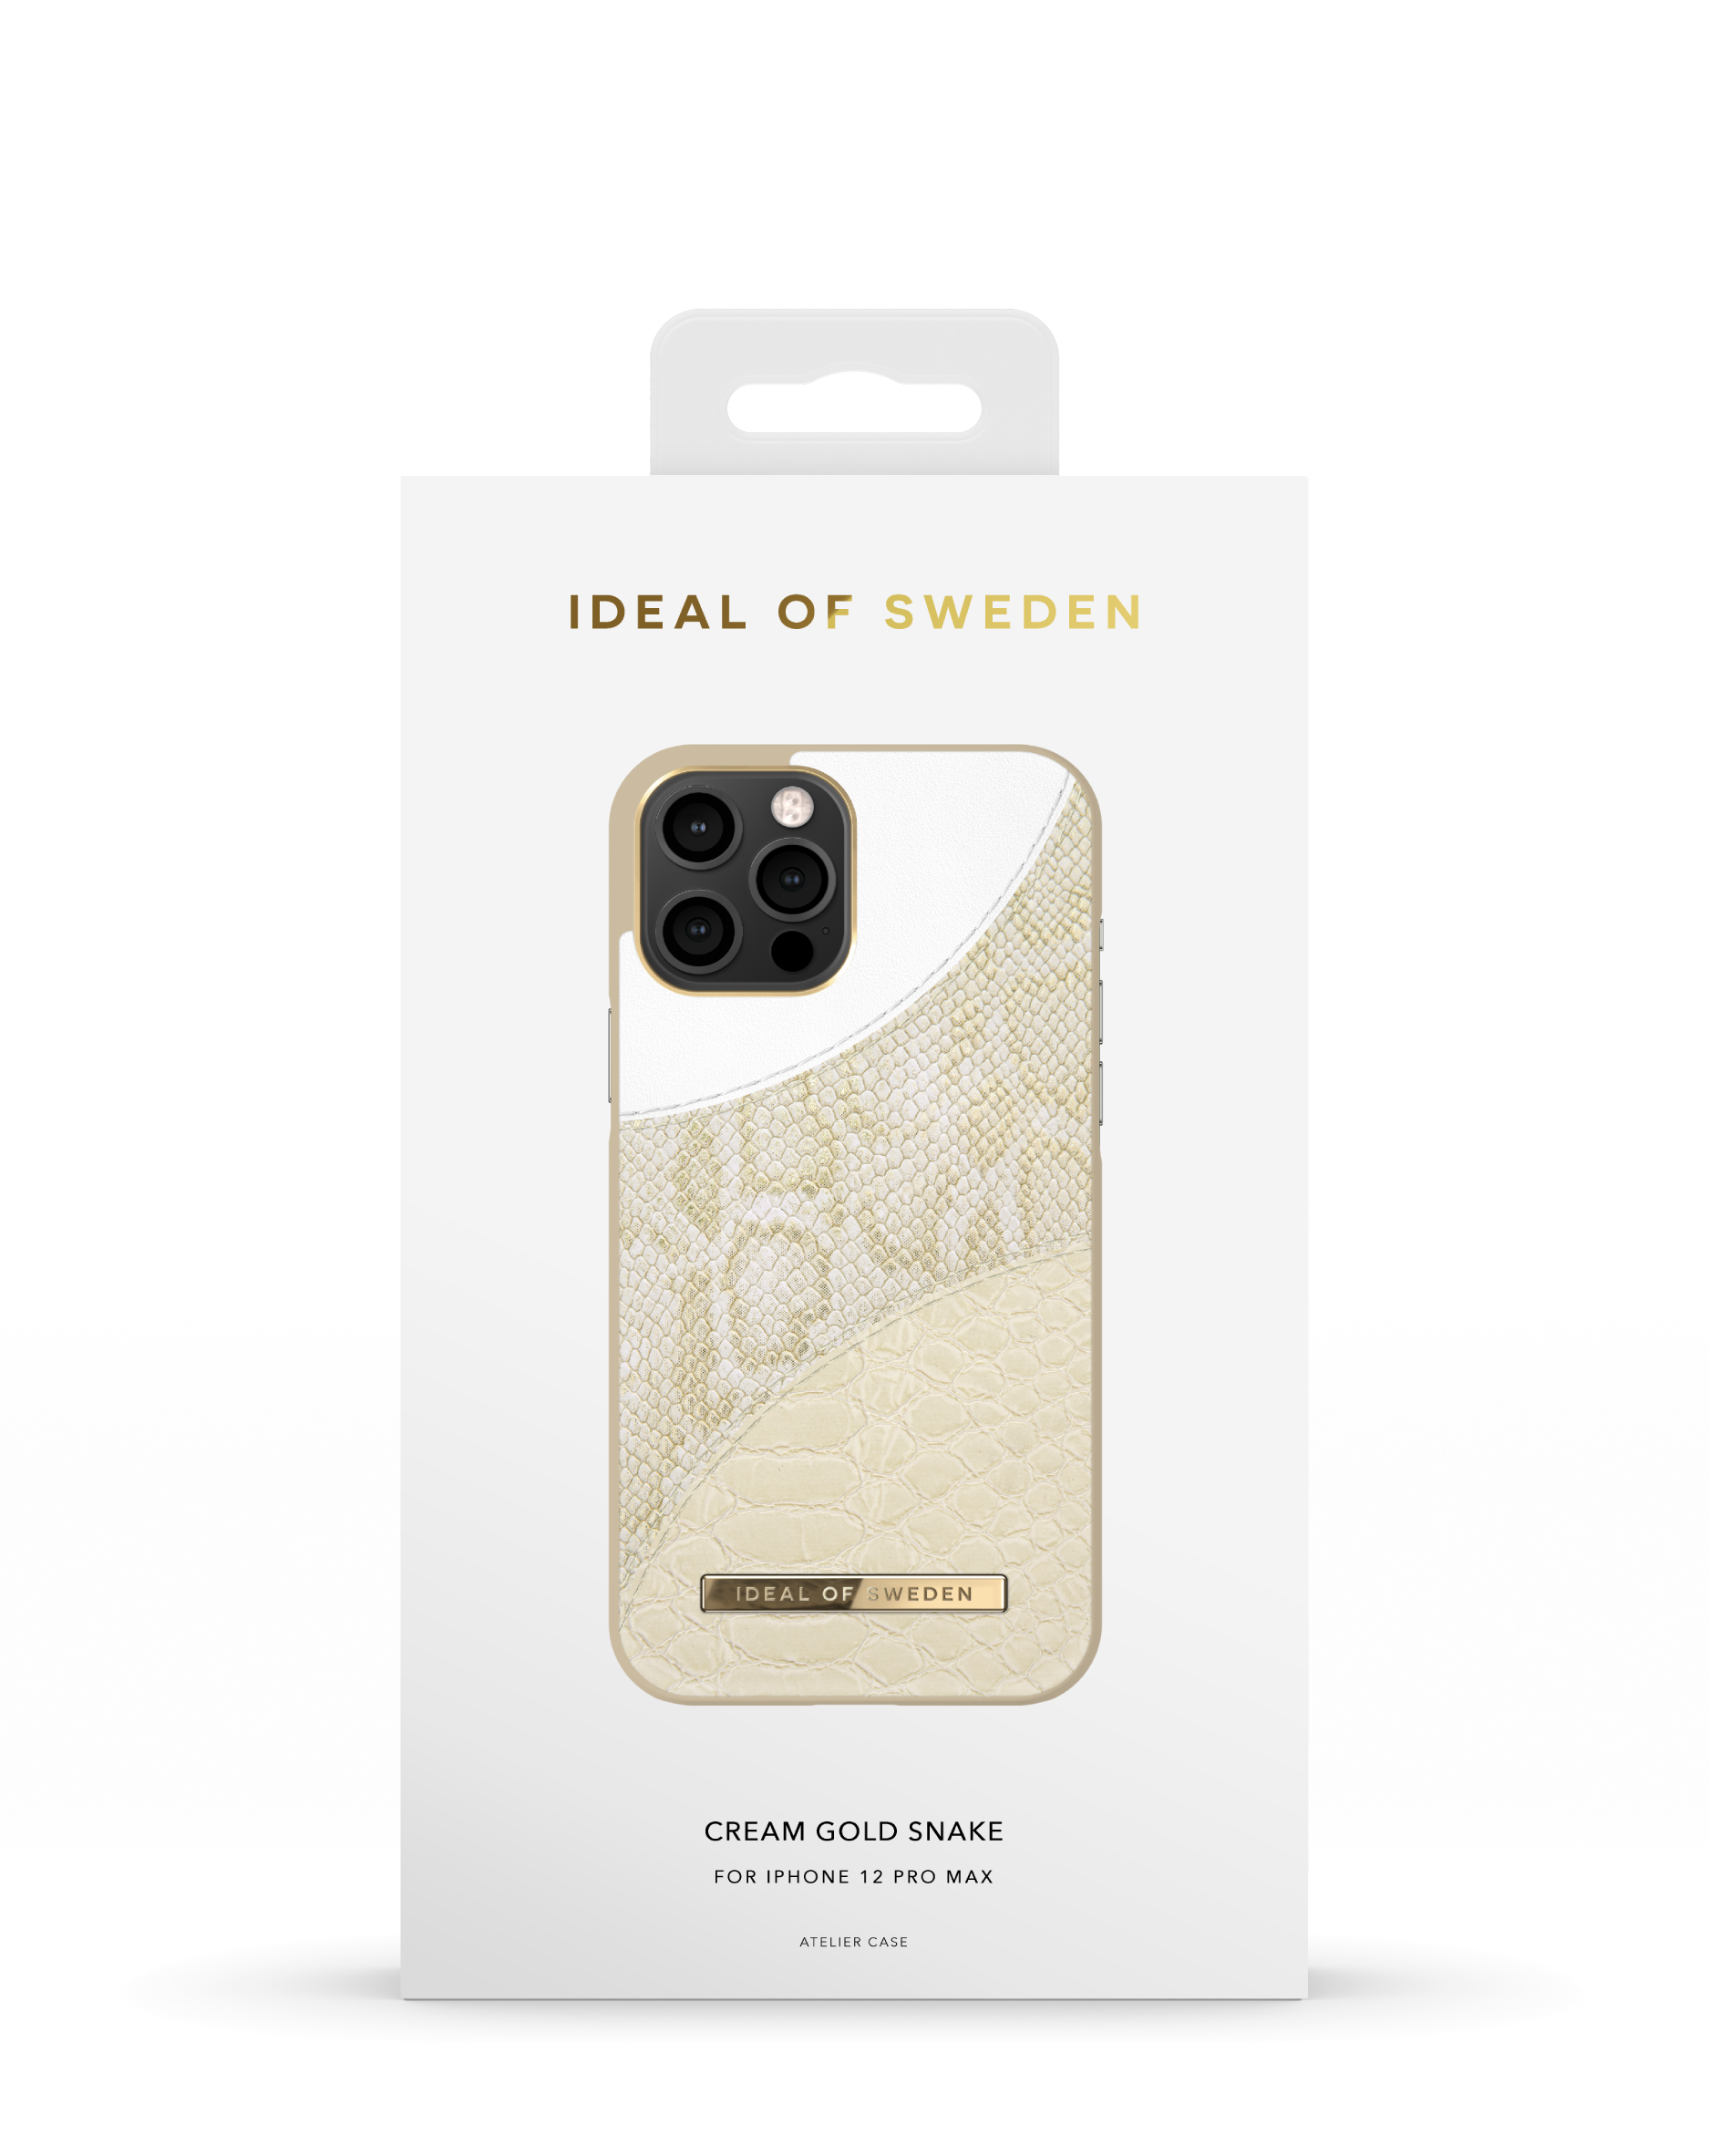 IDACSS21-I2067, SWEDEN Backcover, Max, OF Gold Apple, Snake IDEAL Pro 12 Cream IPhone